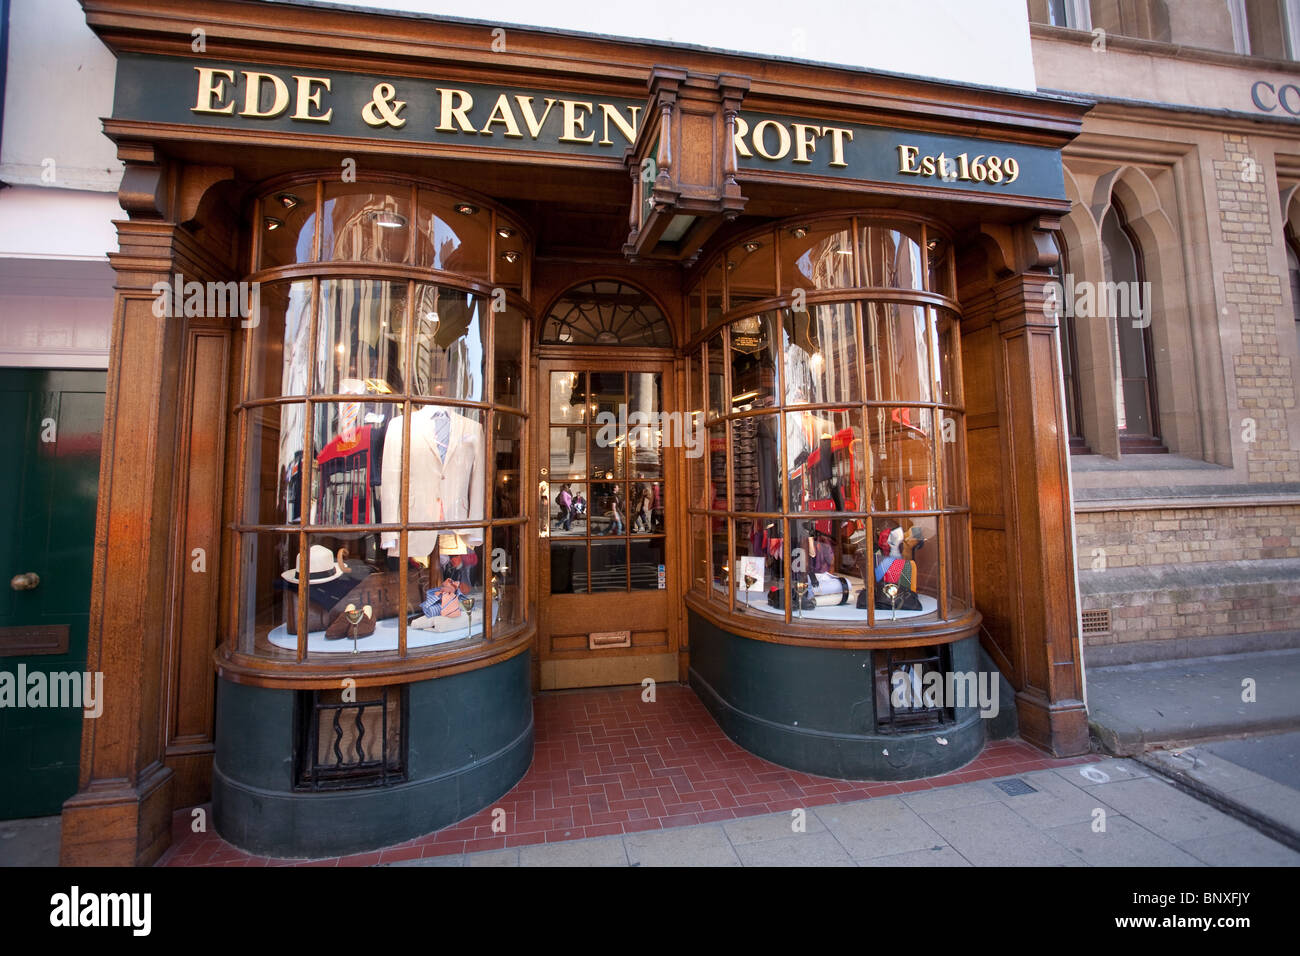 Ede Ravenscroft High Resolution Stock Photography And Images Alamy